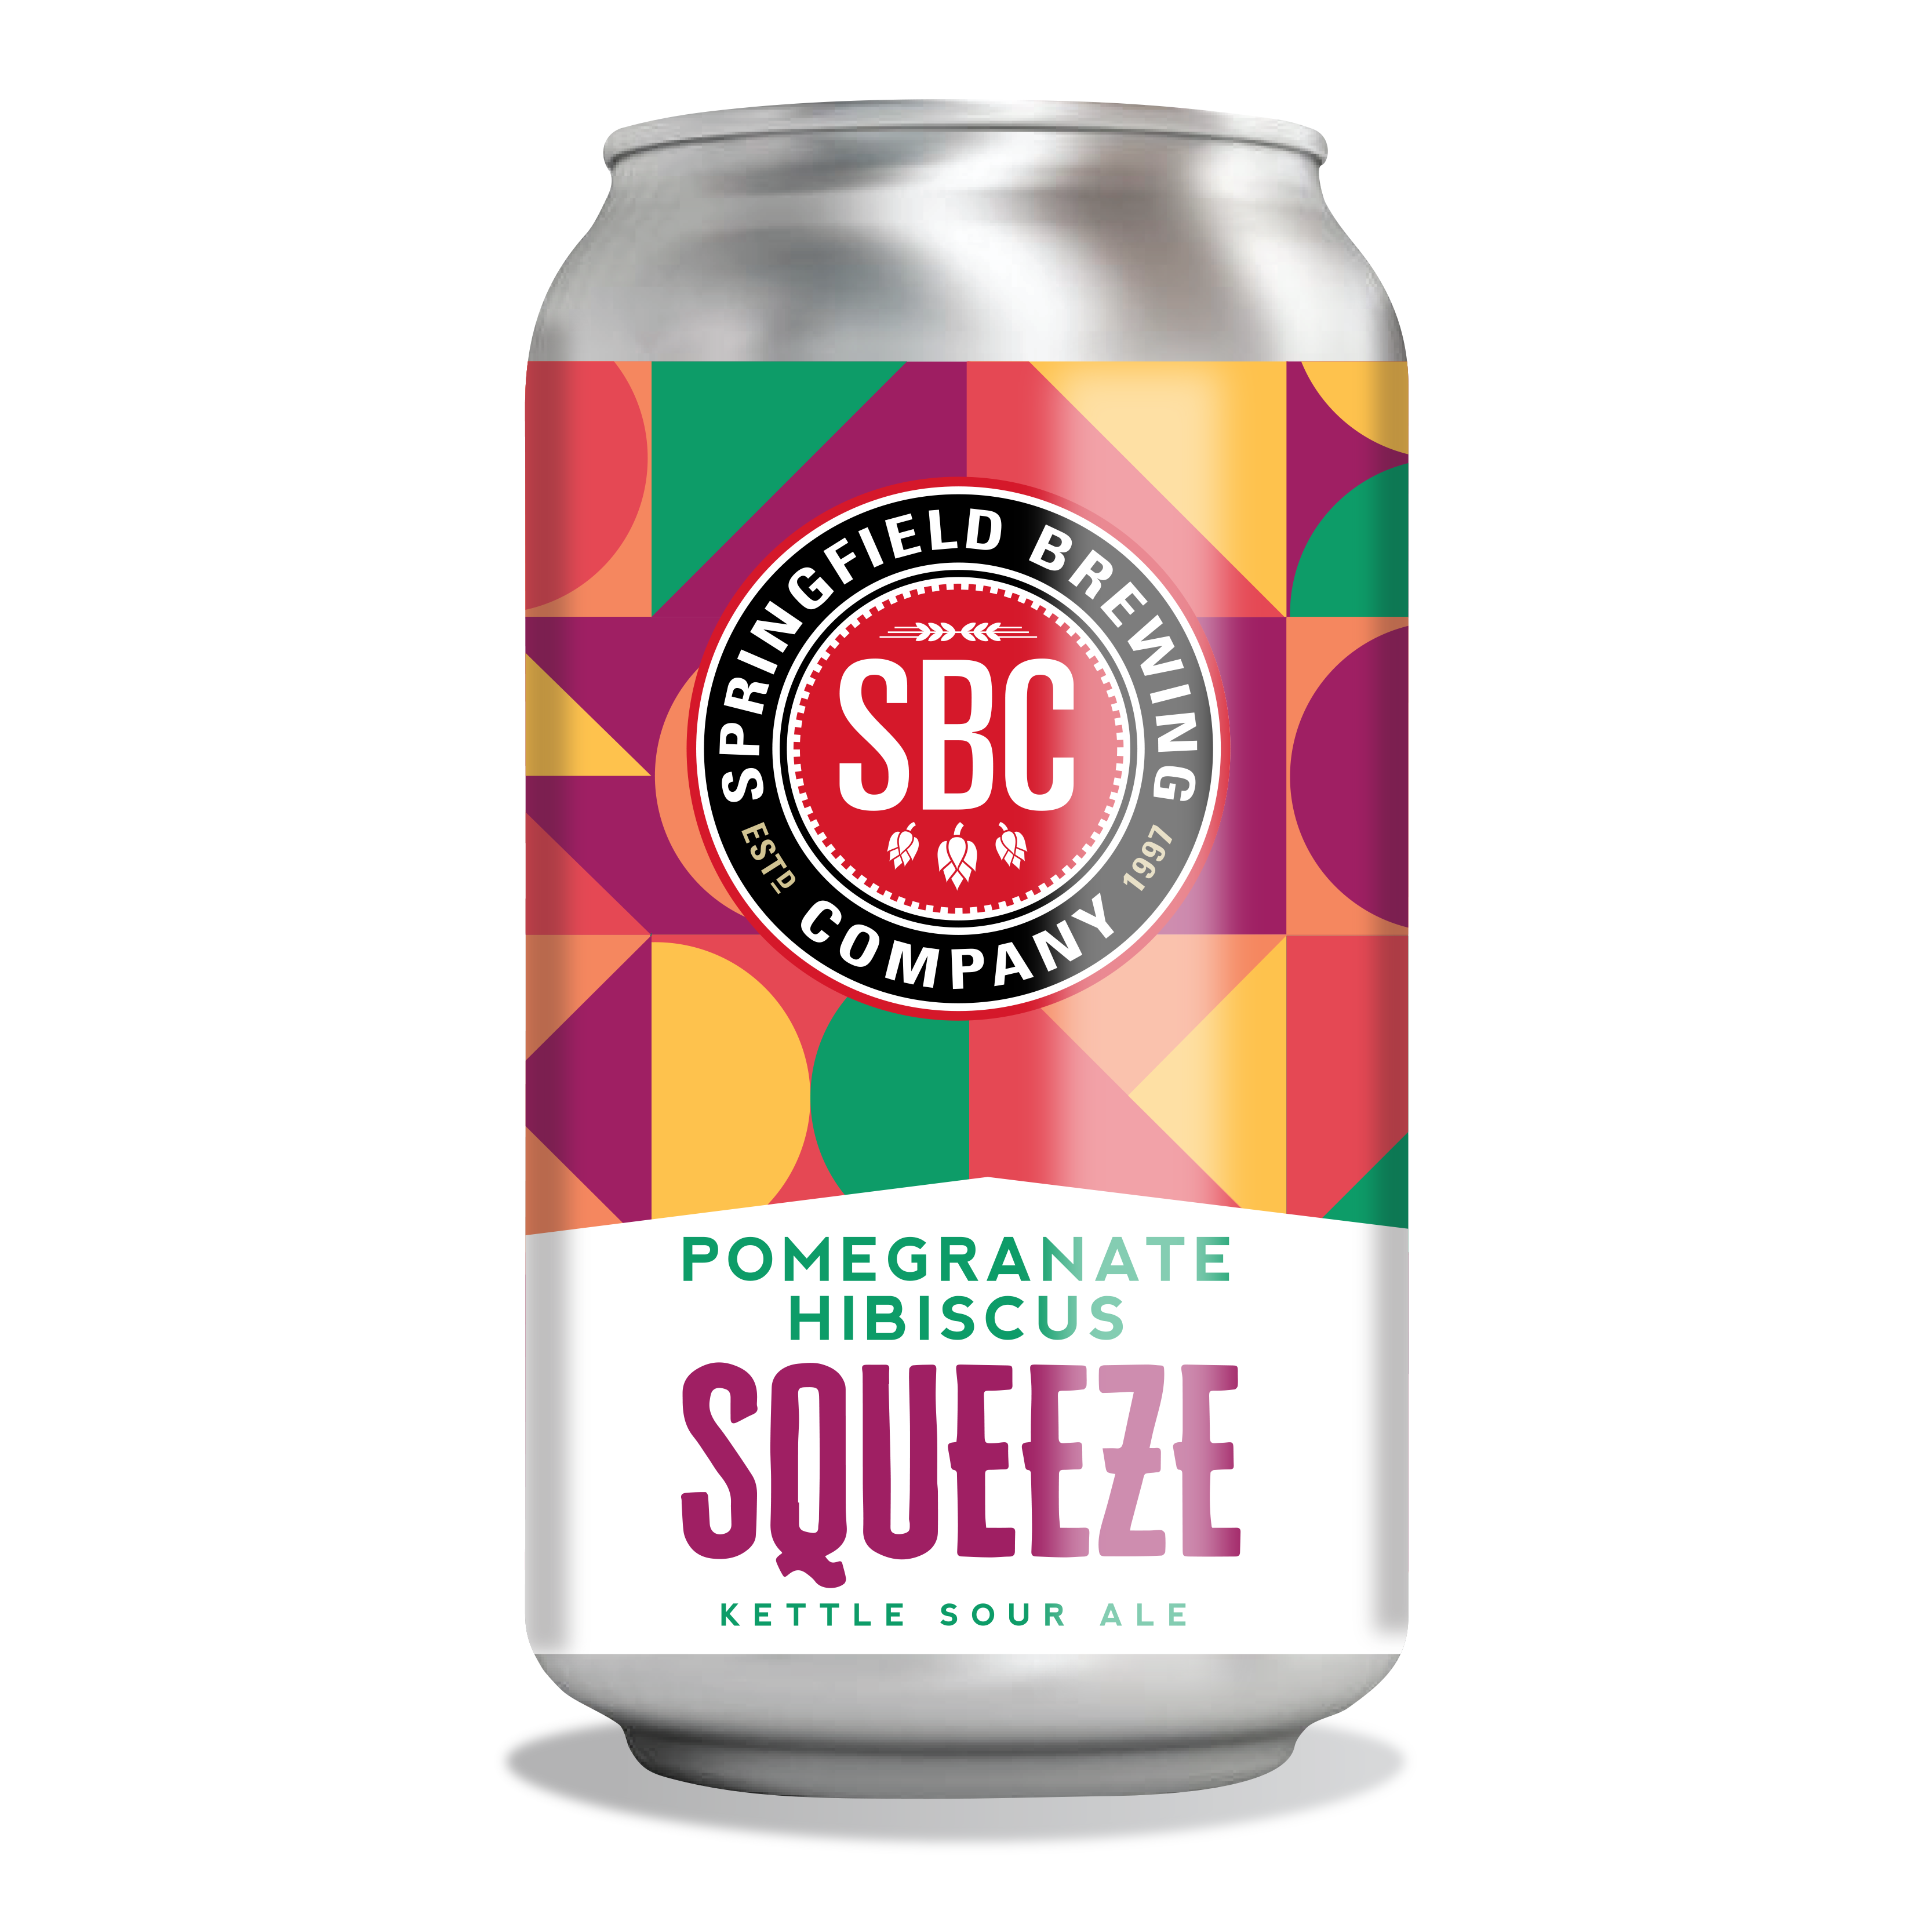 https://brewery.springfieldbrewingco.com/wp-content/uploads/2021/11/PomeSqueezeUpdate_CanWebsite.png